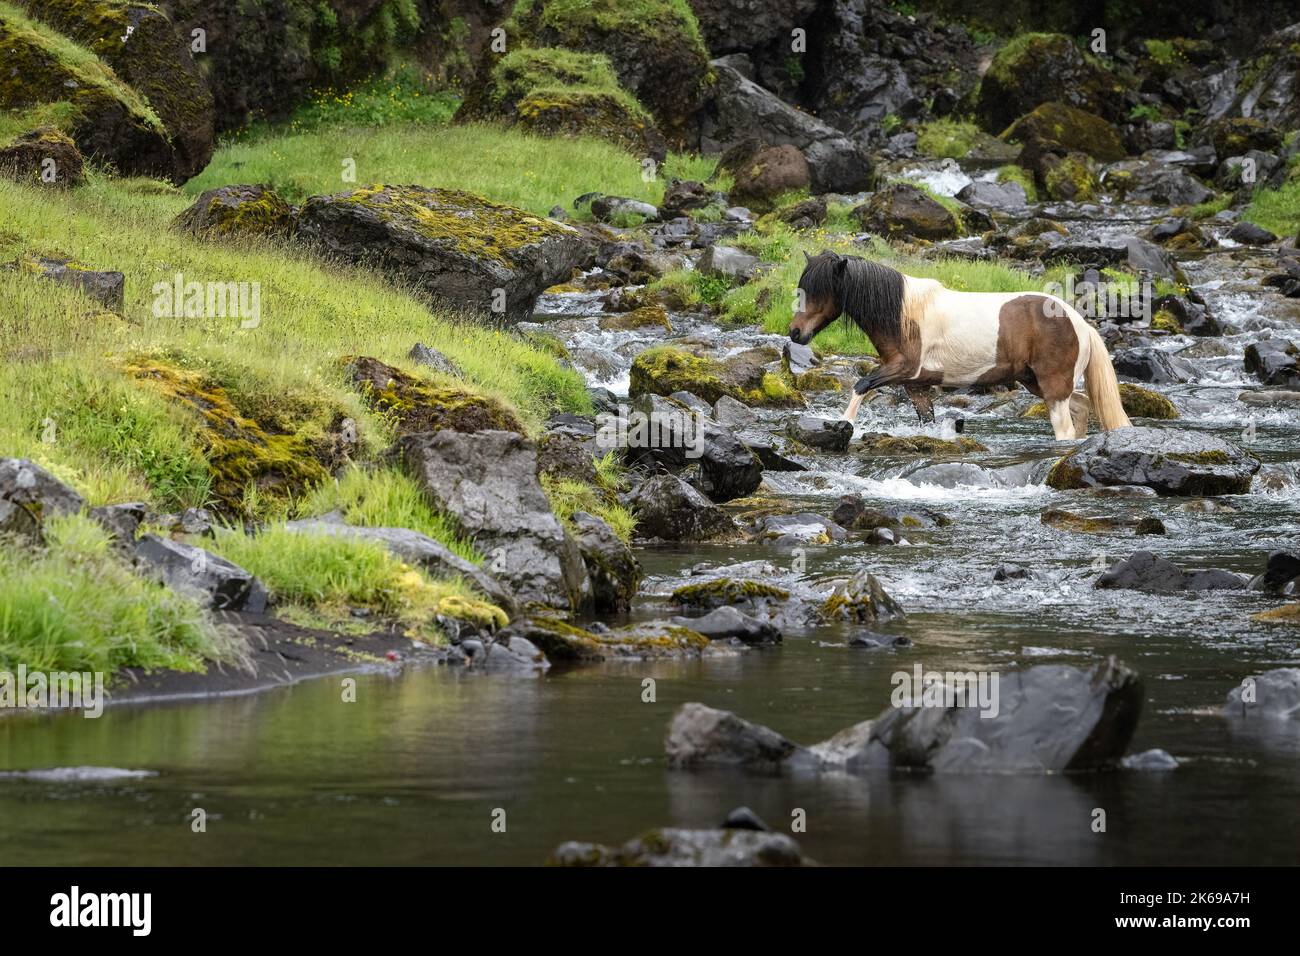 Brown and white Icelandic horse crossing a mountain stream Stock Photo